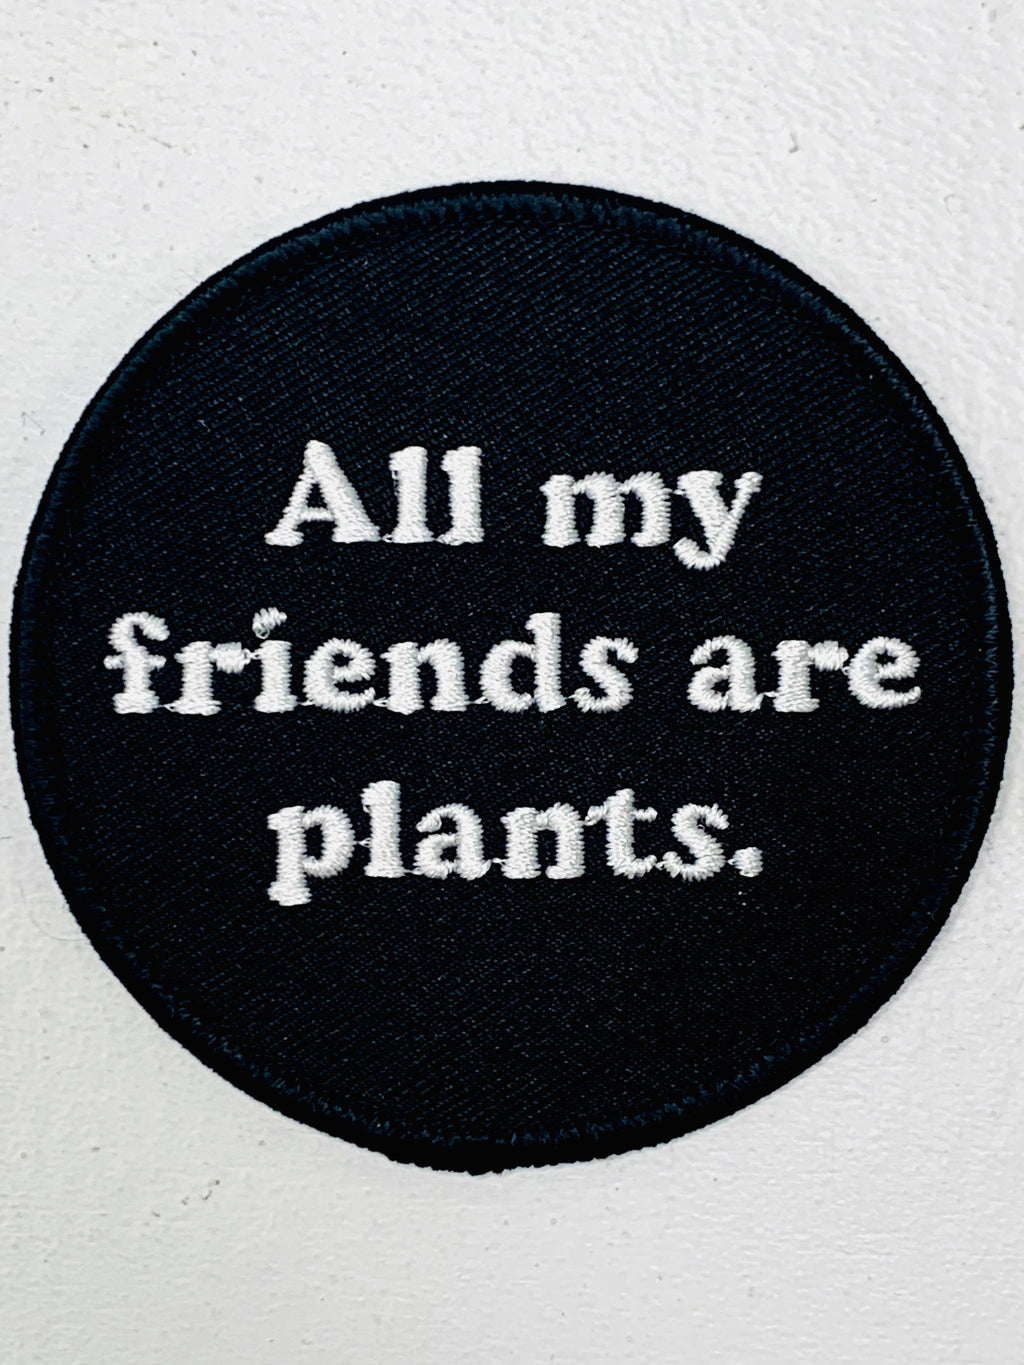 All My Friends Are Plants Embroidered Patch